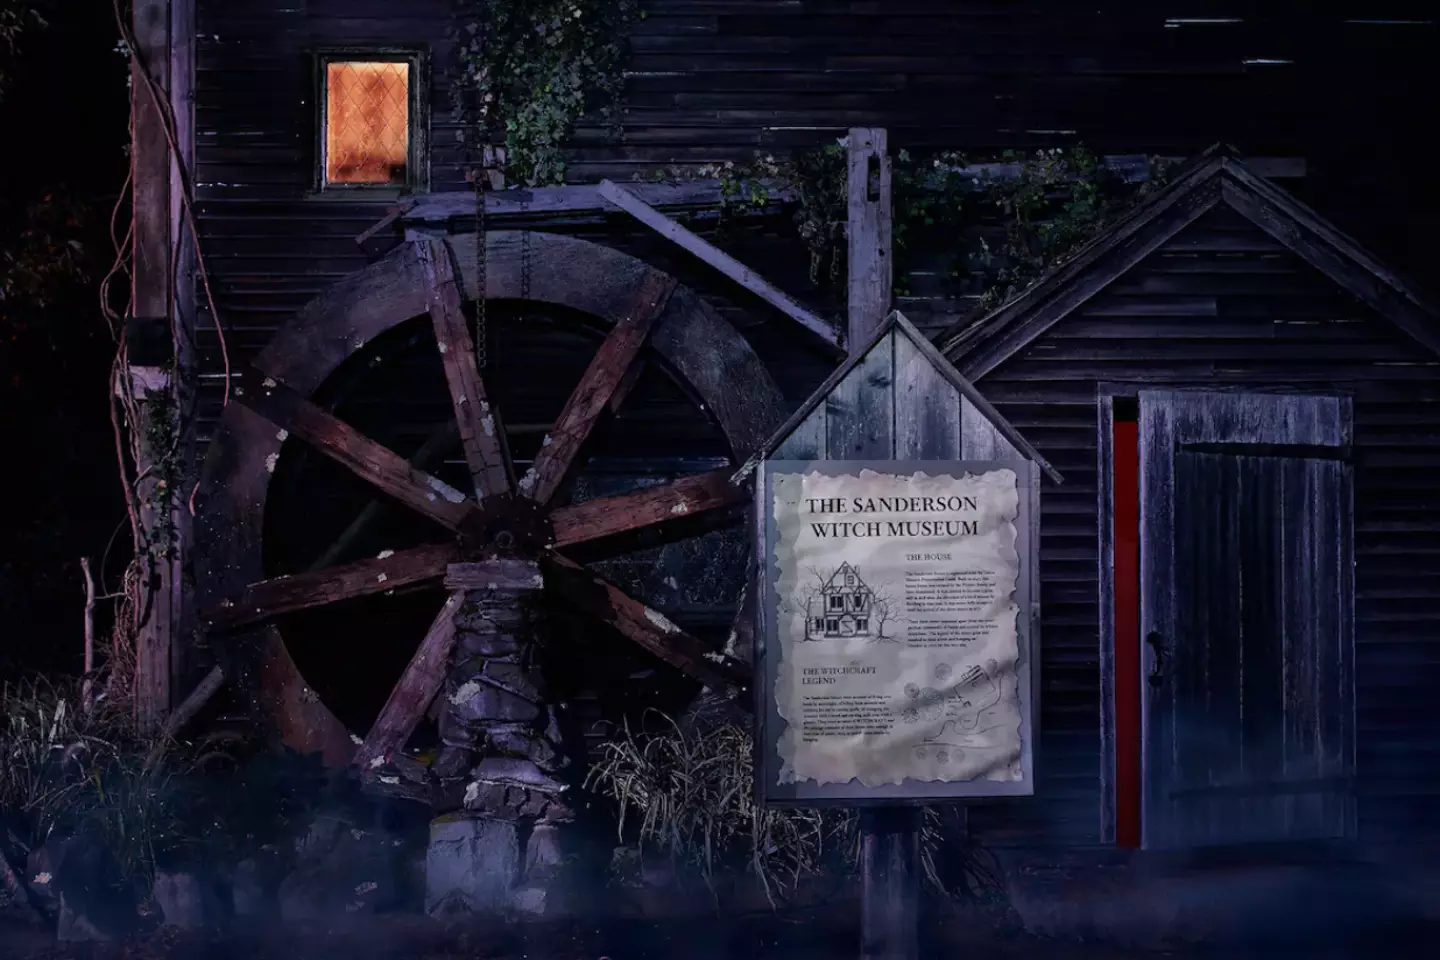 Will you enter the cottage by window or water wheel?